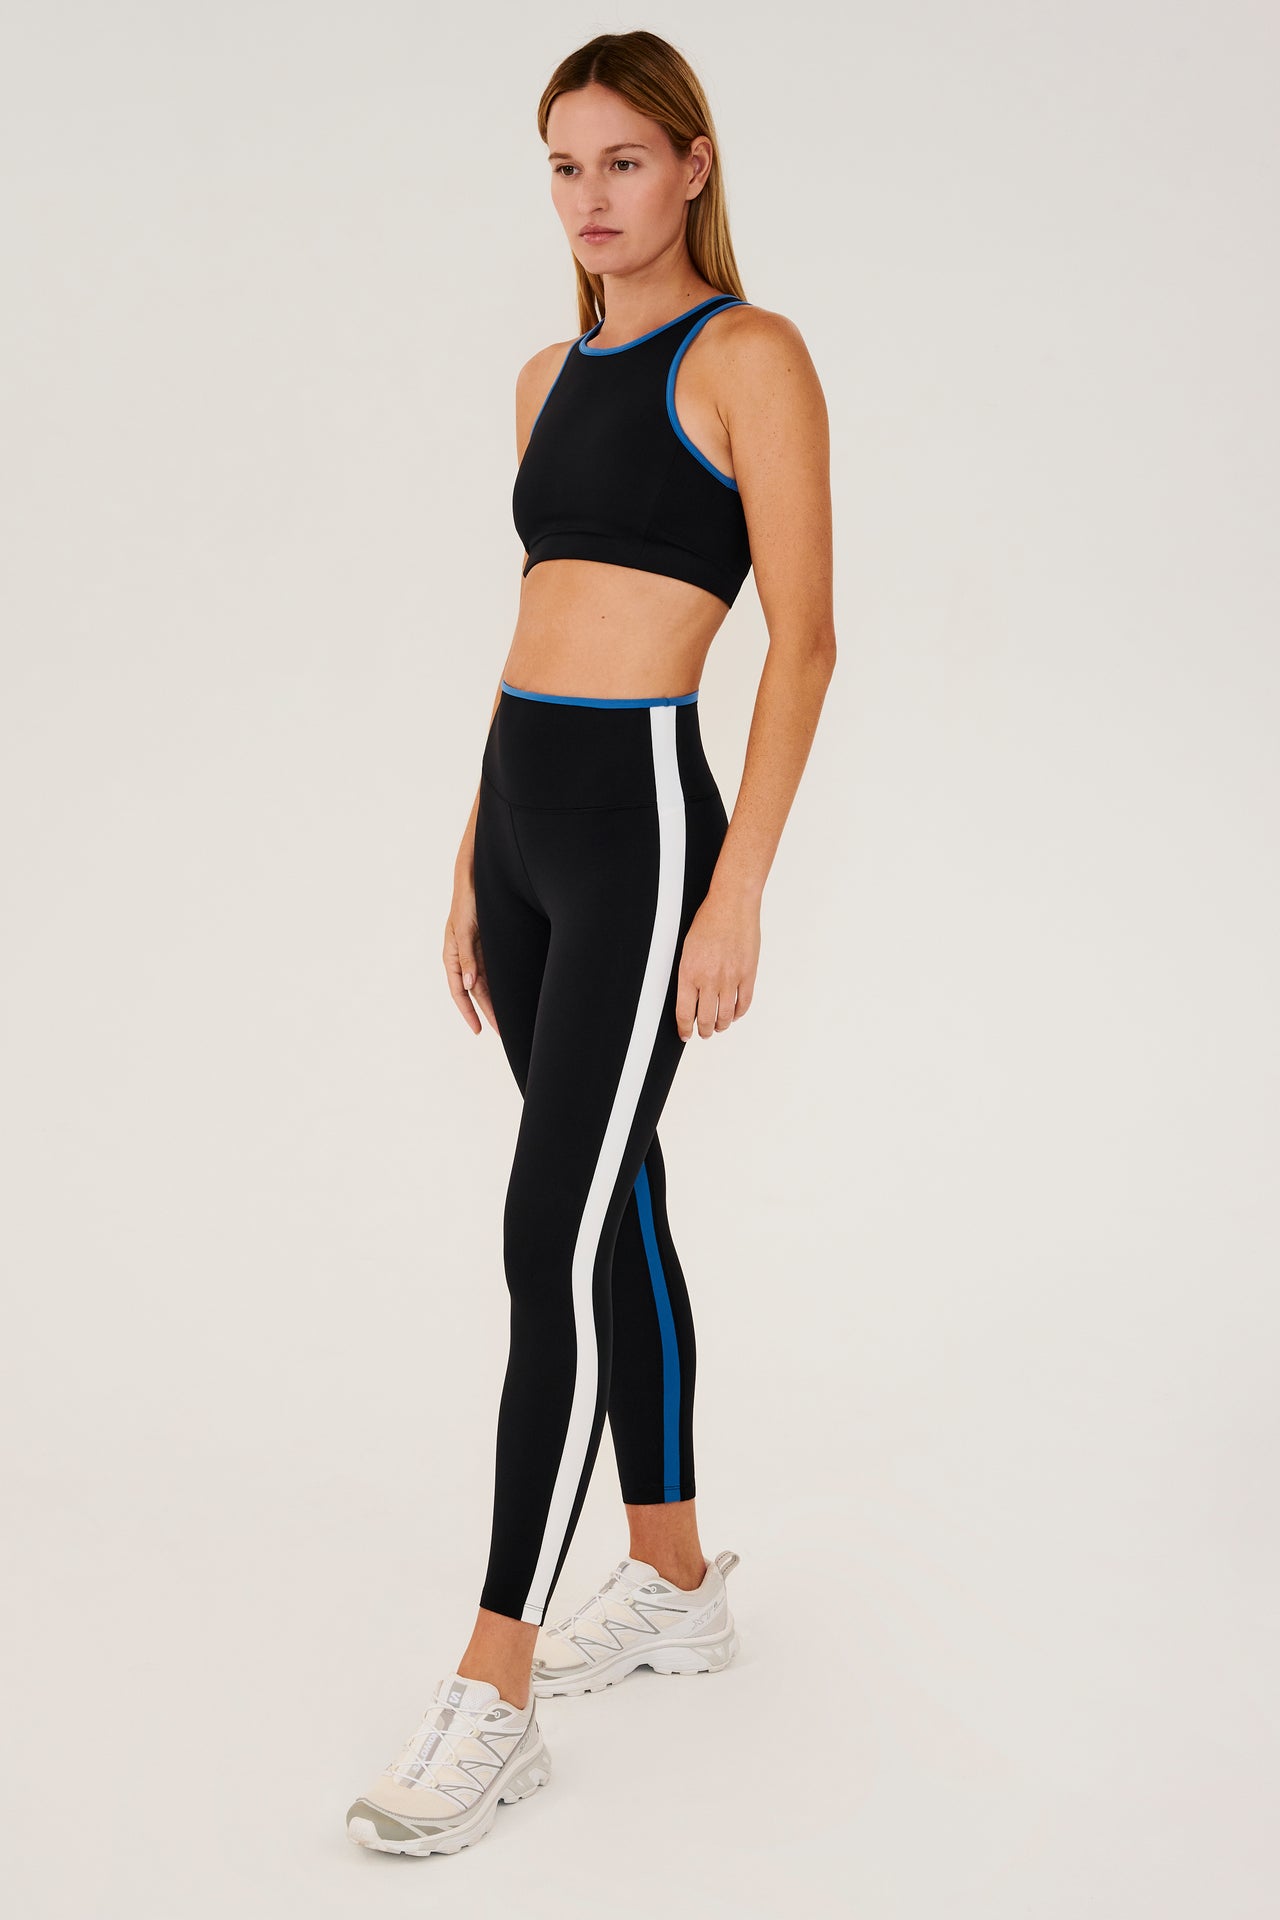 Full front view of woman with blonde hair wearing black bra with bright blue border arm and neckline and black leggings with bright blue and white side stripes with bright blue waistband. Paired with white shoes.